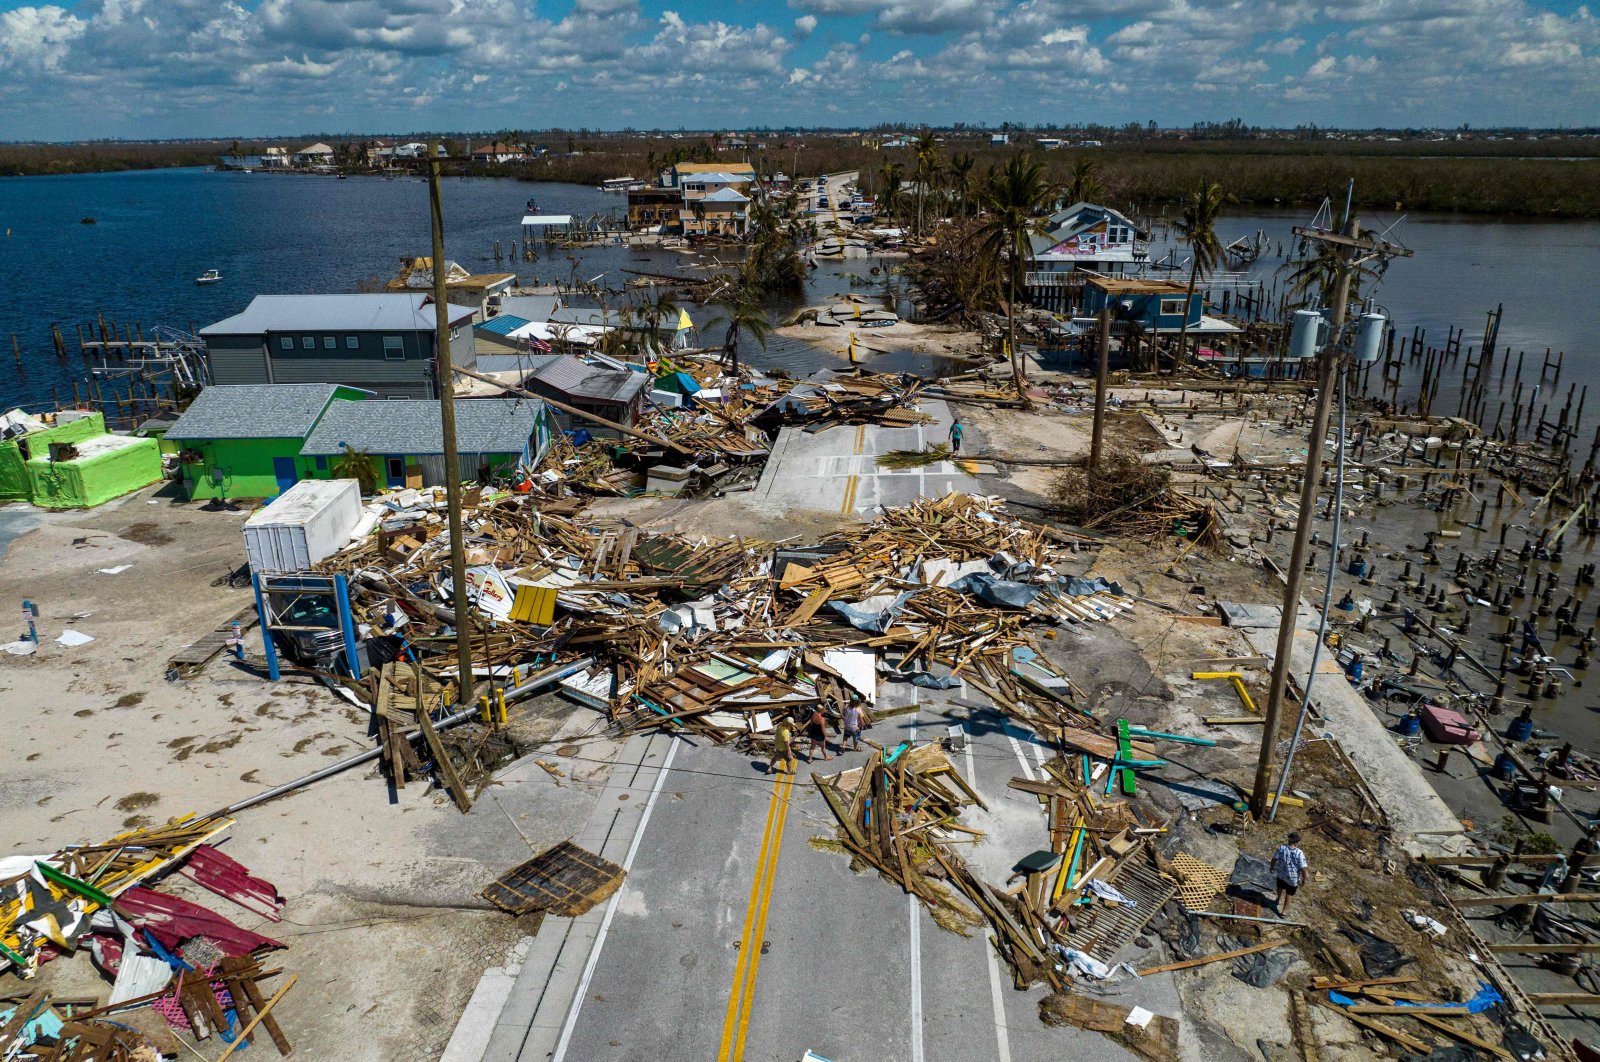 An aerial picture shows a broken section of the Pine Island Road, debris and destroyed houses in the aftermath of Hurricane Ian in Matlacha, Florida, U.S., Oct. 1, 2022. (AFP Photo)